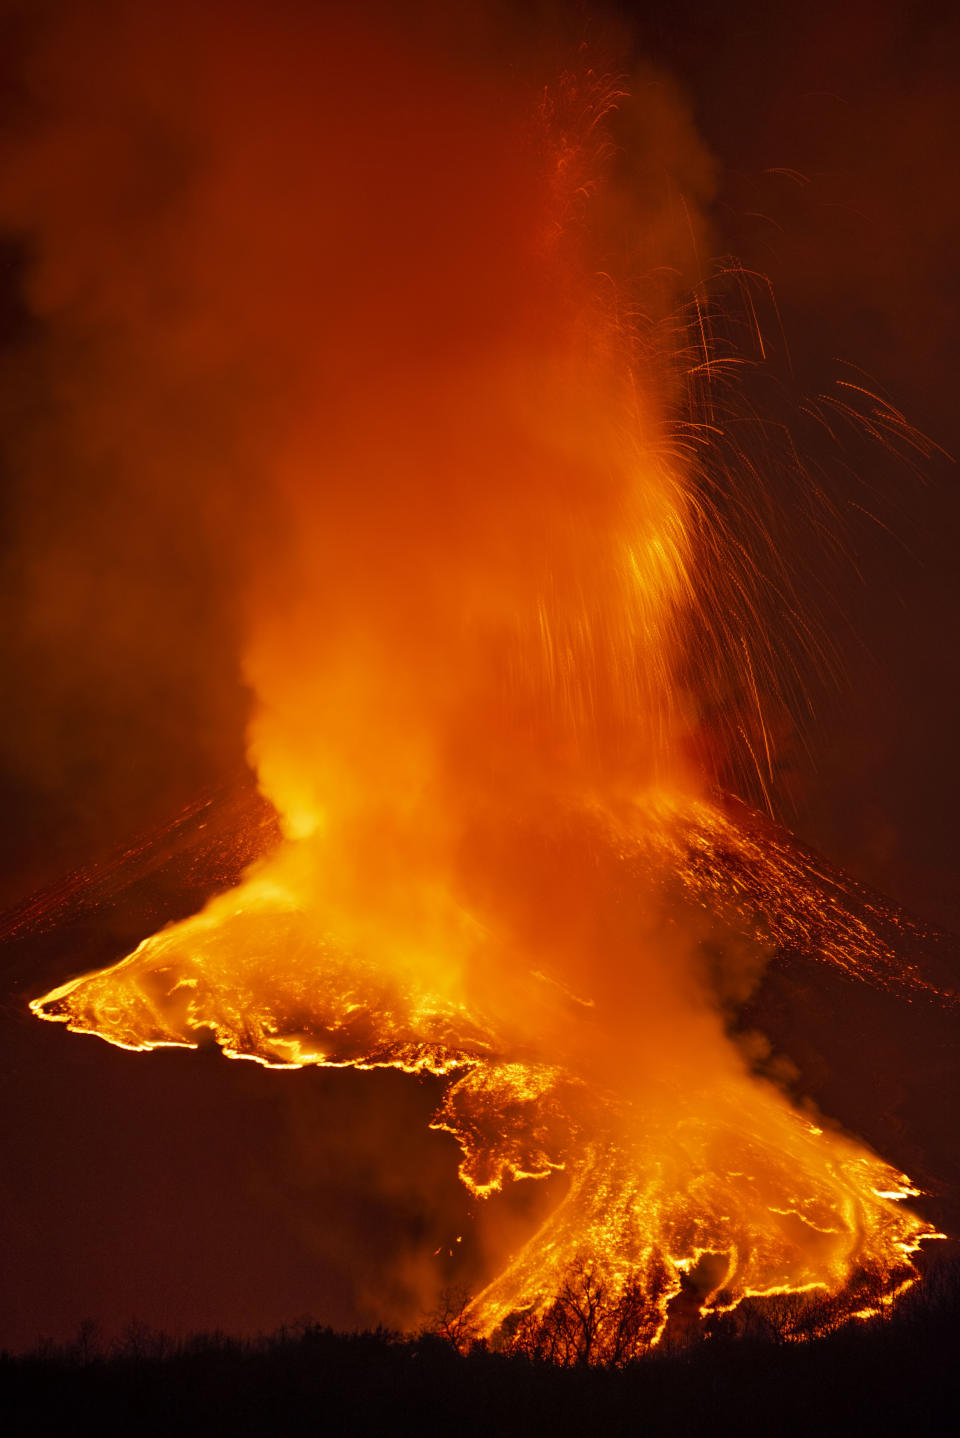 A fiery river of glowing lava flows on the north-east side of the Mt Etna volcano near Milo, Sicily, Wednesday night, Feb. 24, 2021. Europe's most active volcano has been steadily erupting since last week, belching smoke, ash, and fountains of red-hot lava. (AP Photo/Salvatore Allegra)